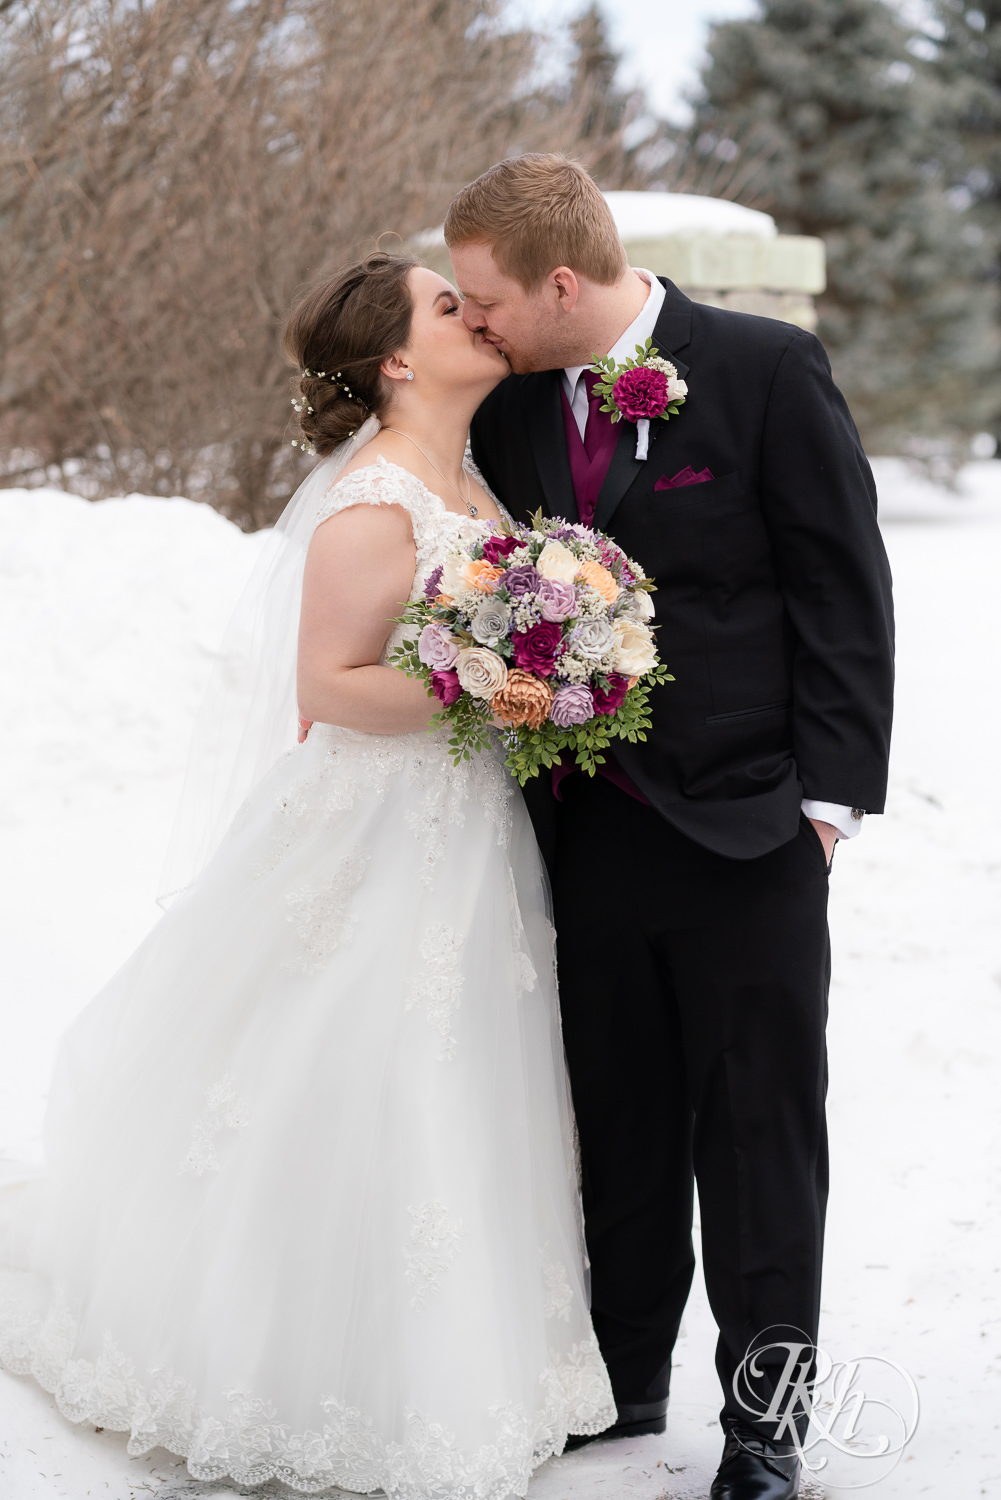 Bride and groom kissing in the snow at Glenhaven Events in Farmington, Minnesota.